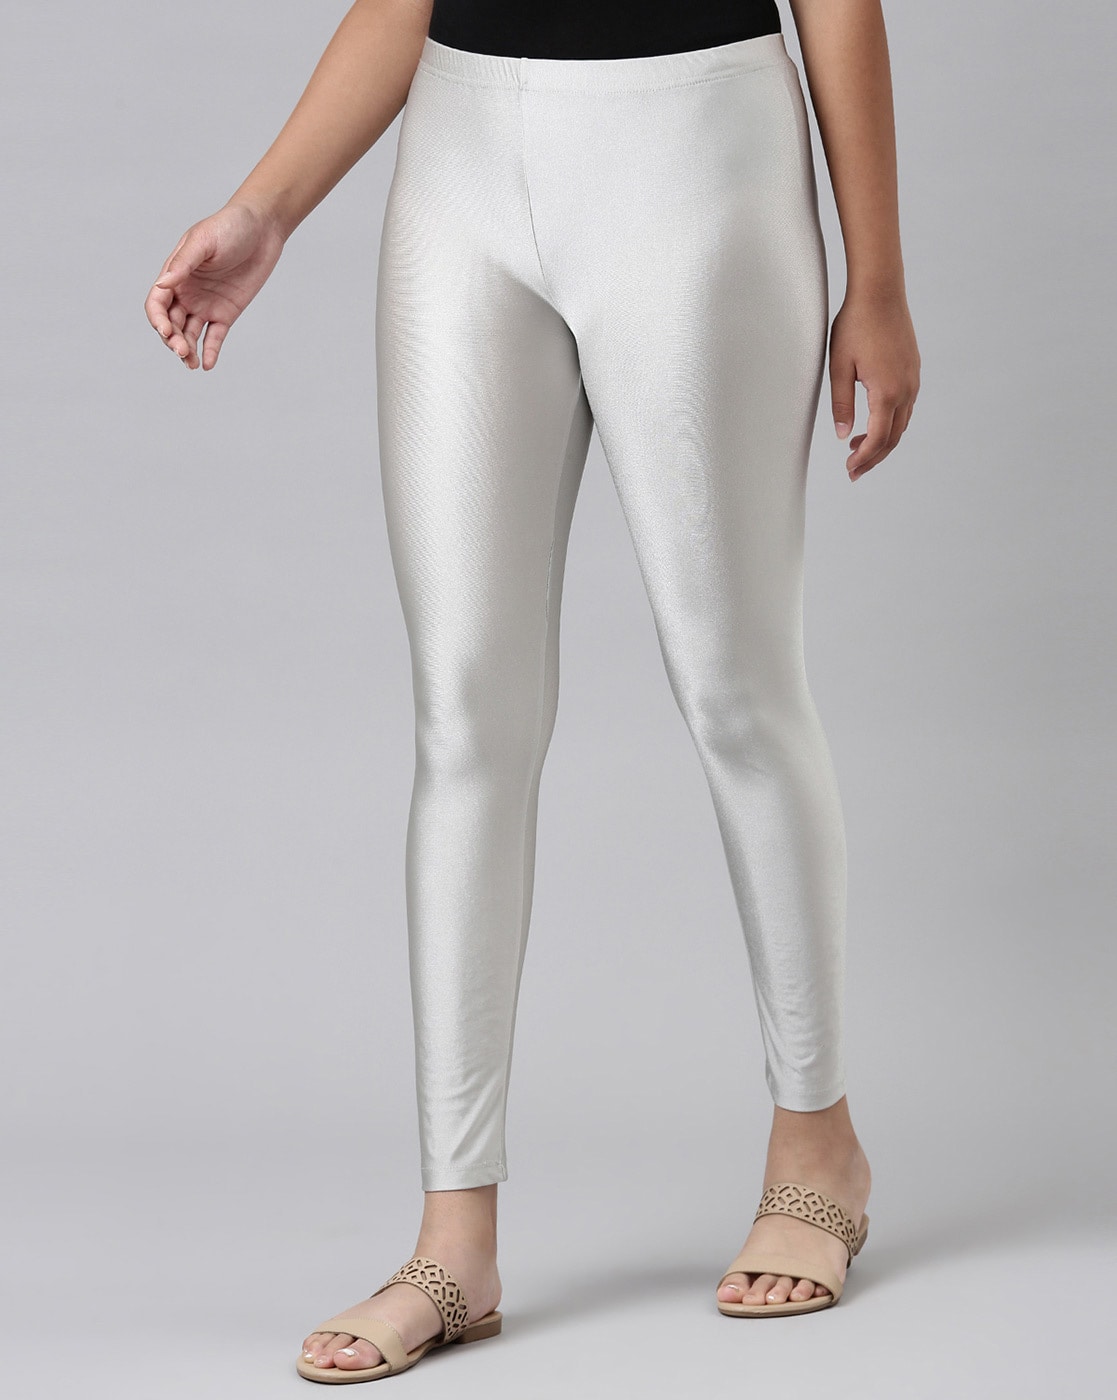 Silver High Waist Ladies Shimmer Leggings, Casual Wear, Slim Fit at Rs 100  in Indore